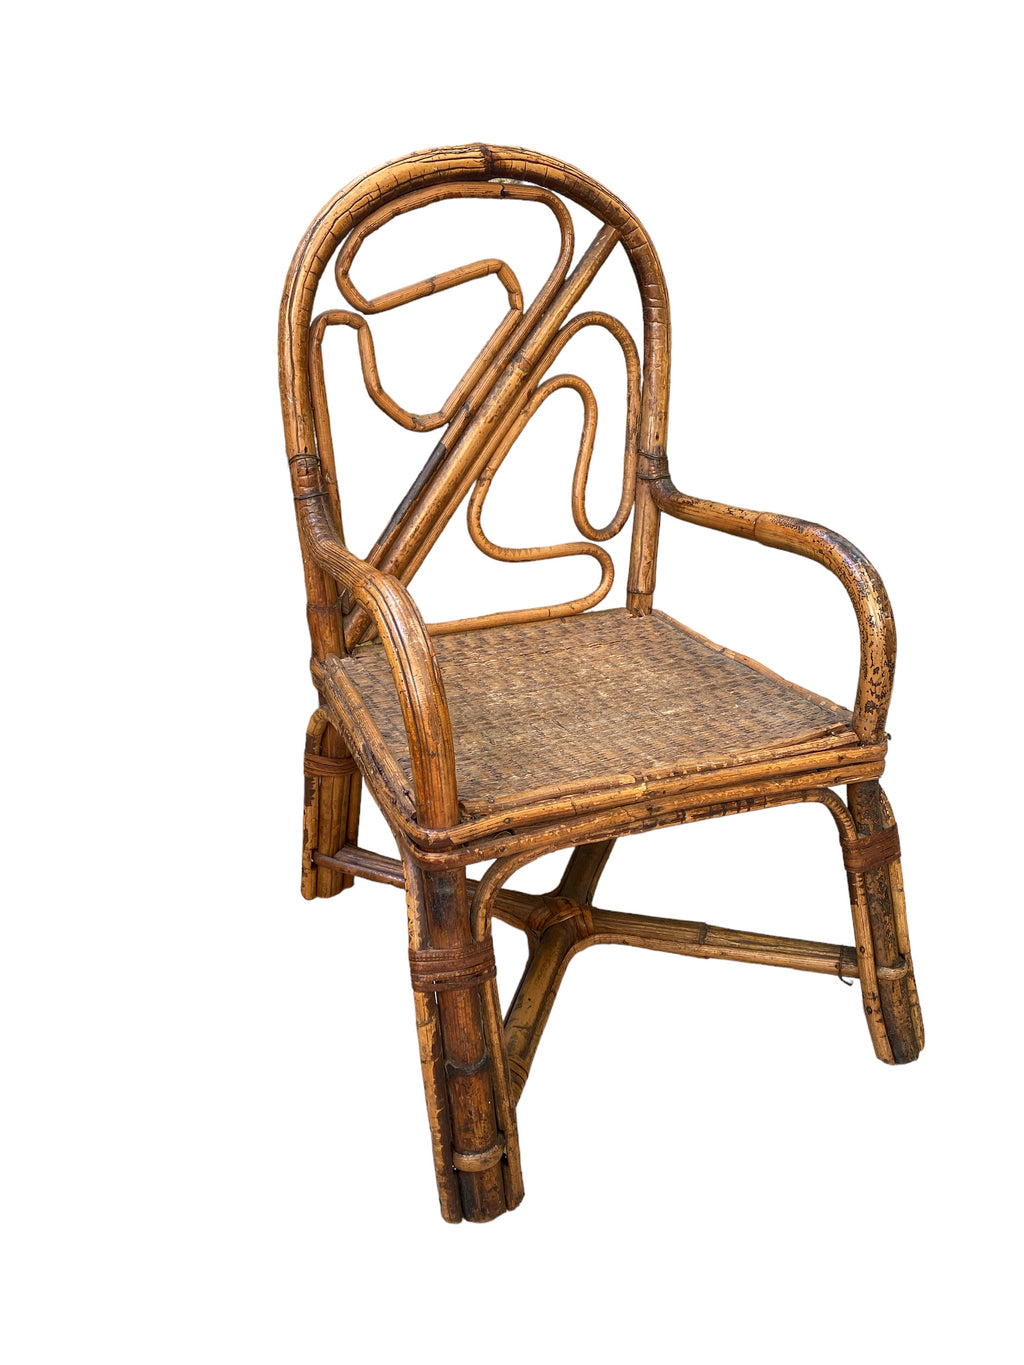 French Rattan Childs Chair